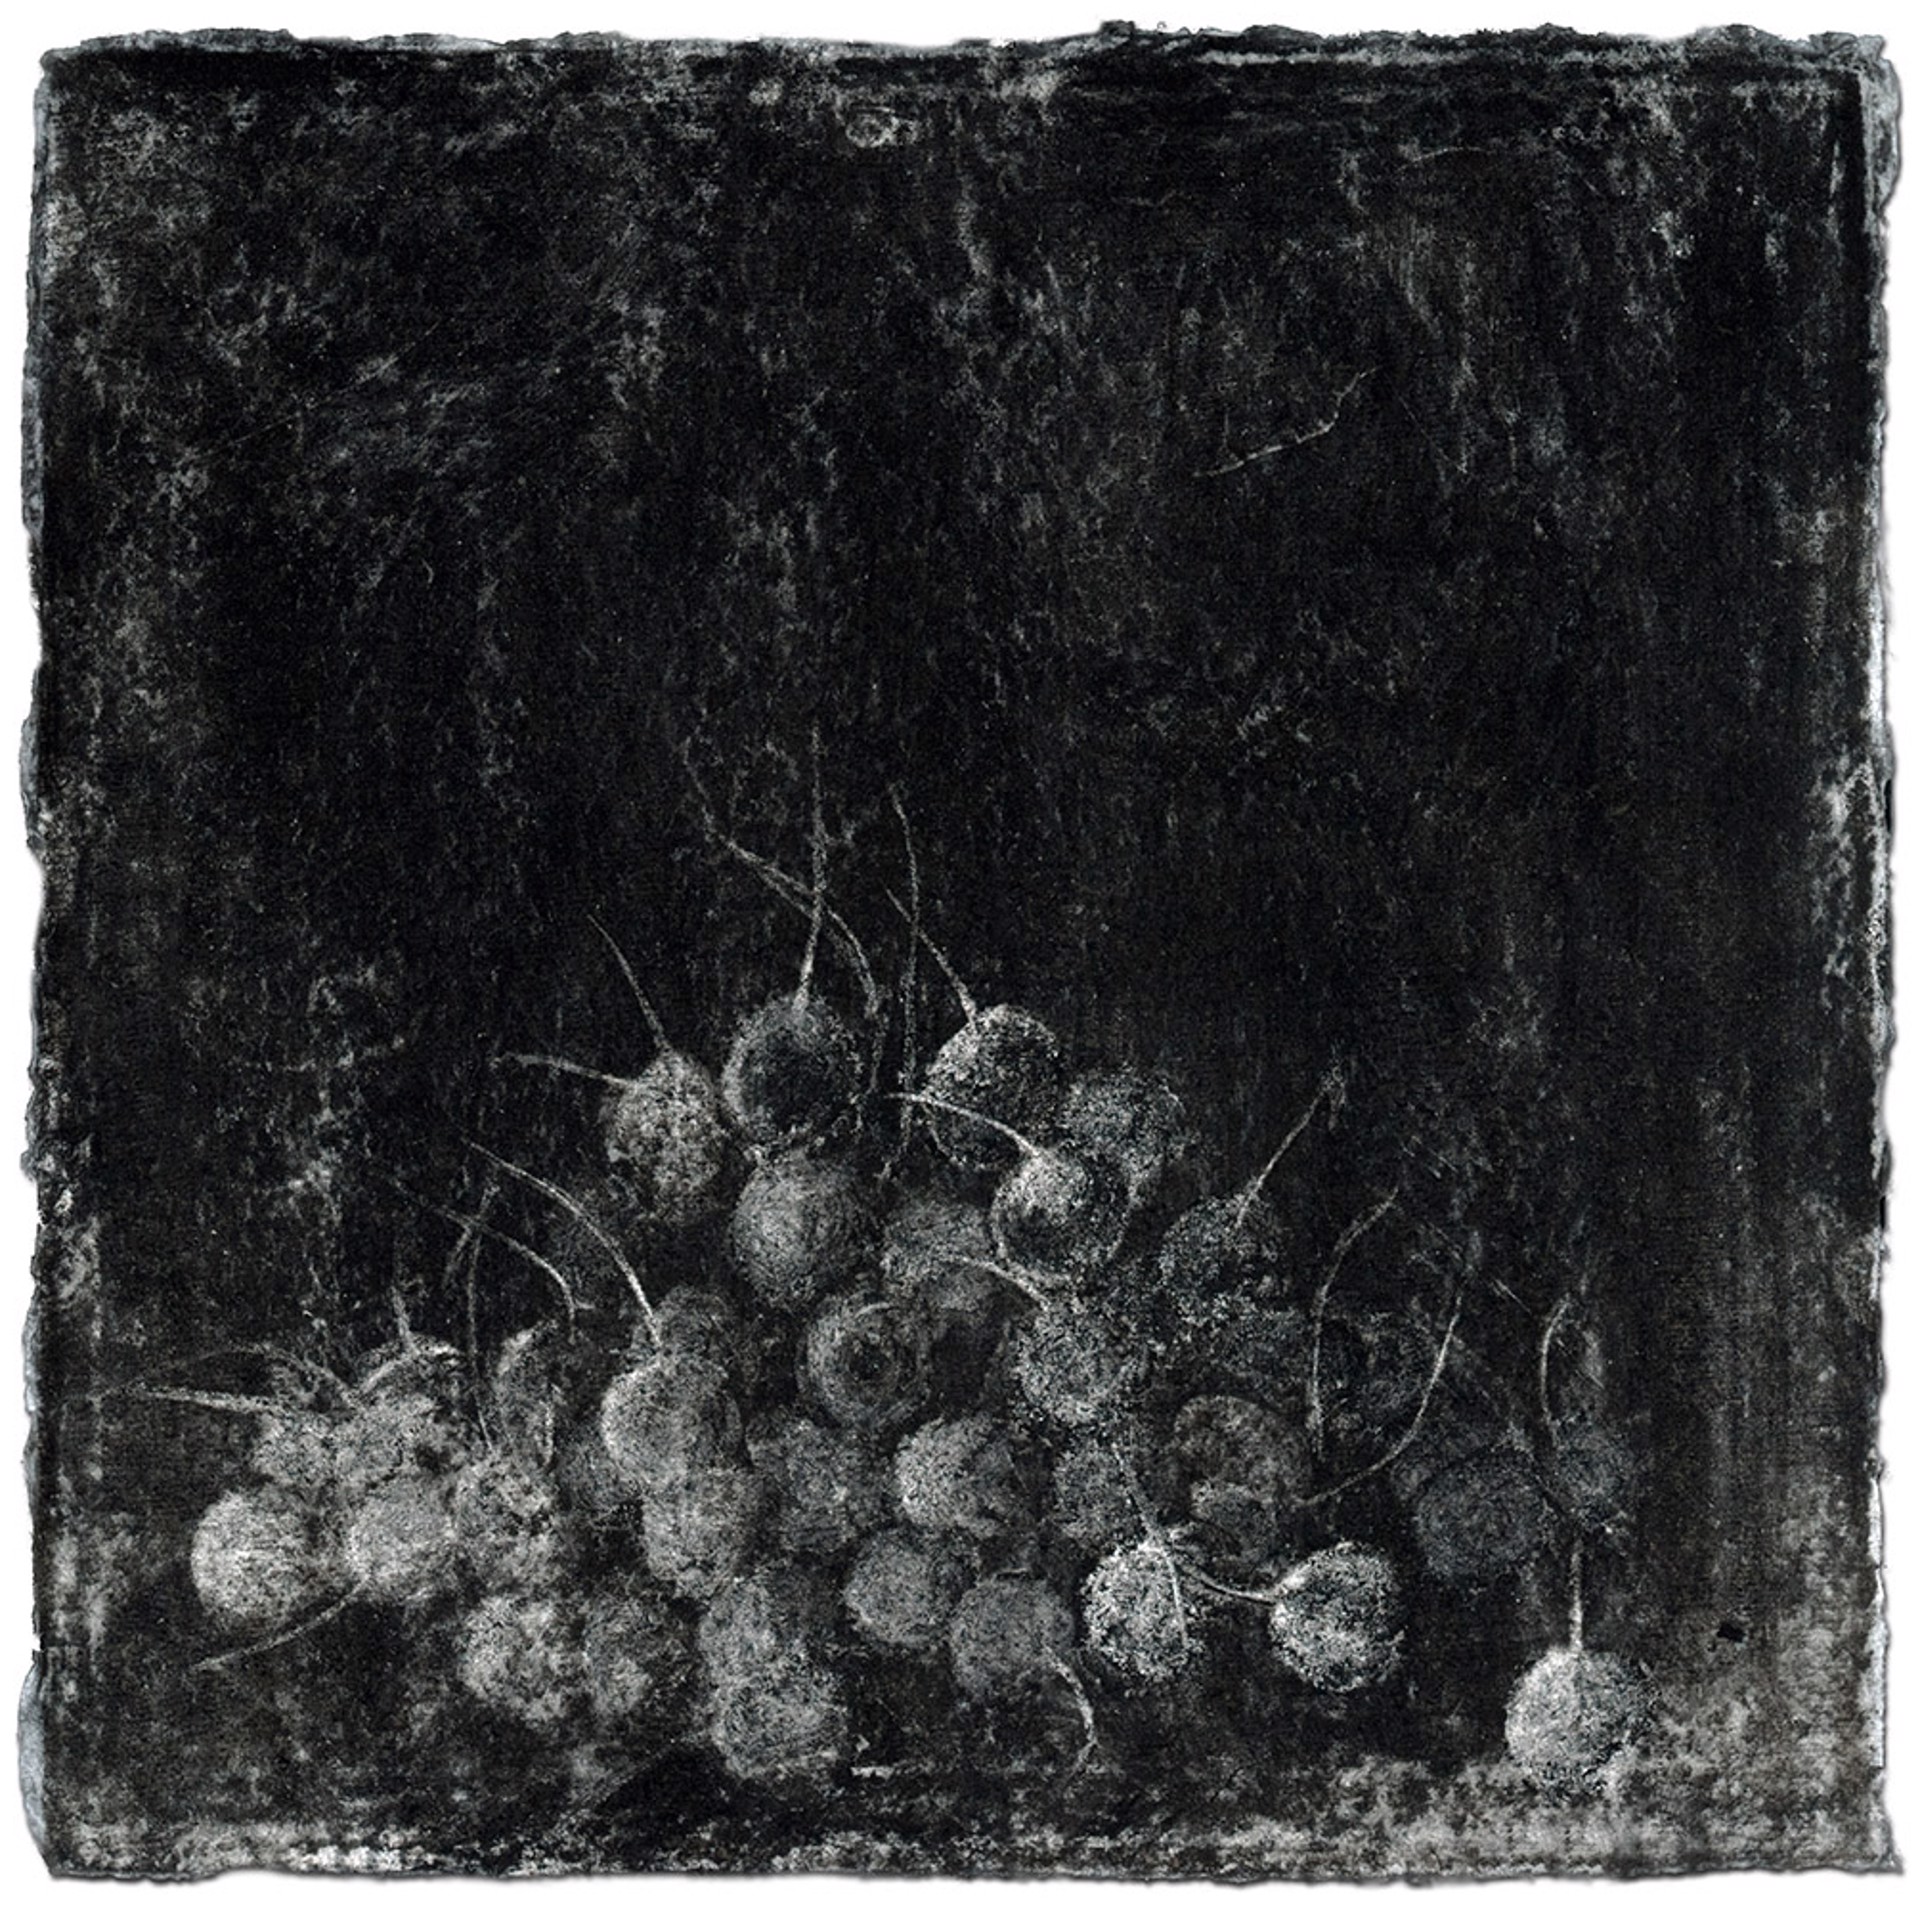 Untitled, Black Drawing #10 by Kathy Moss